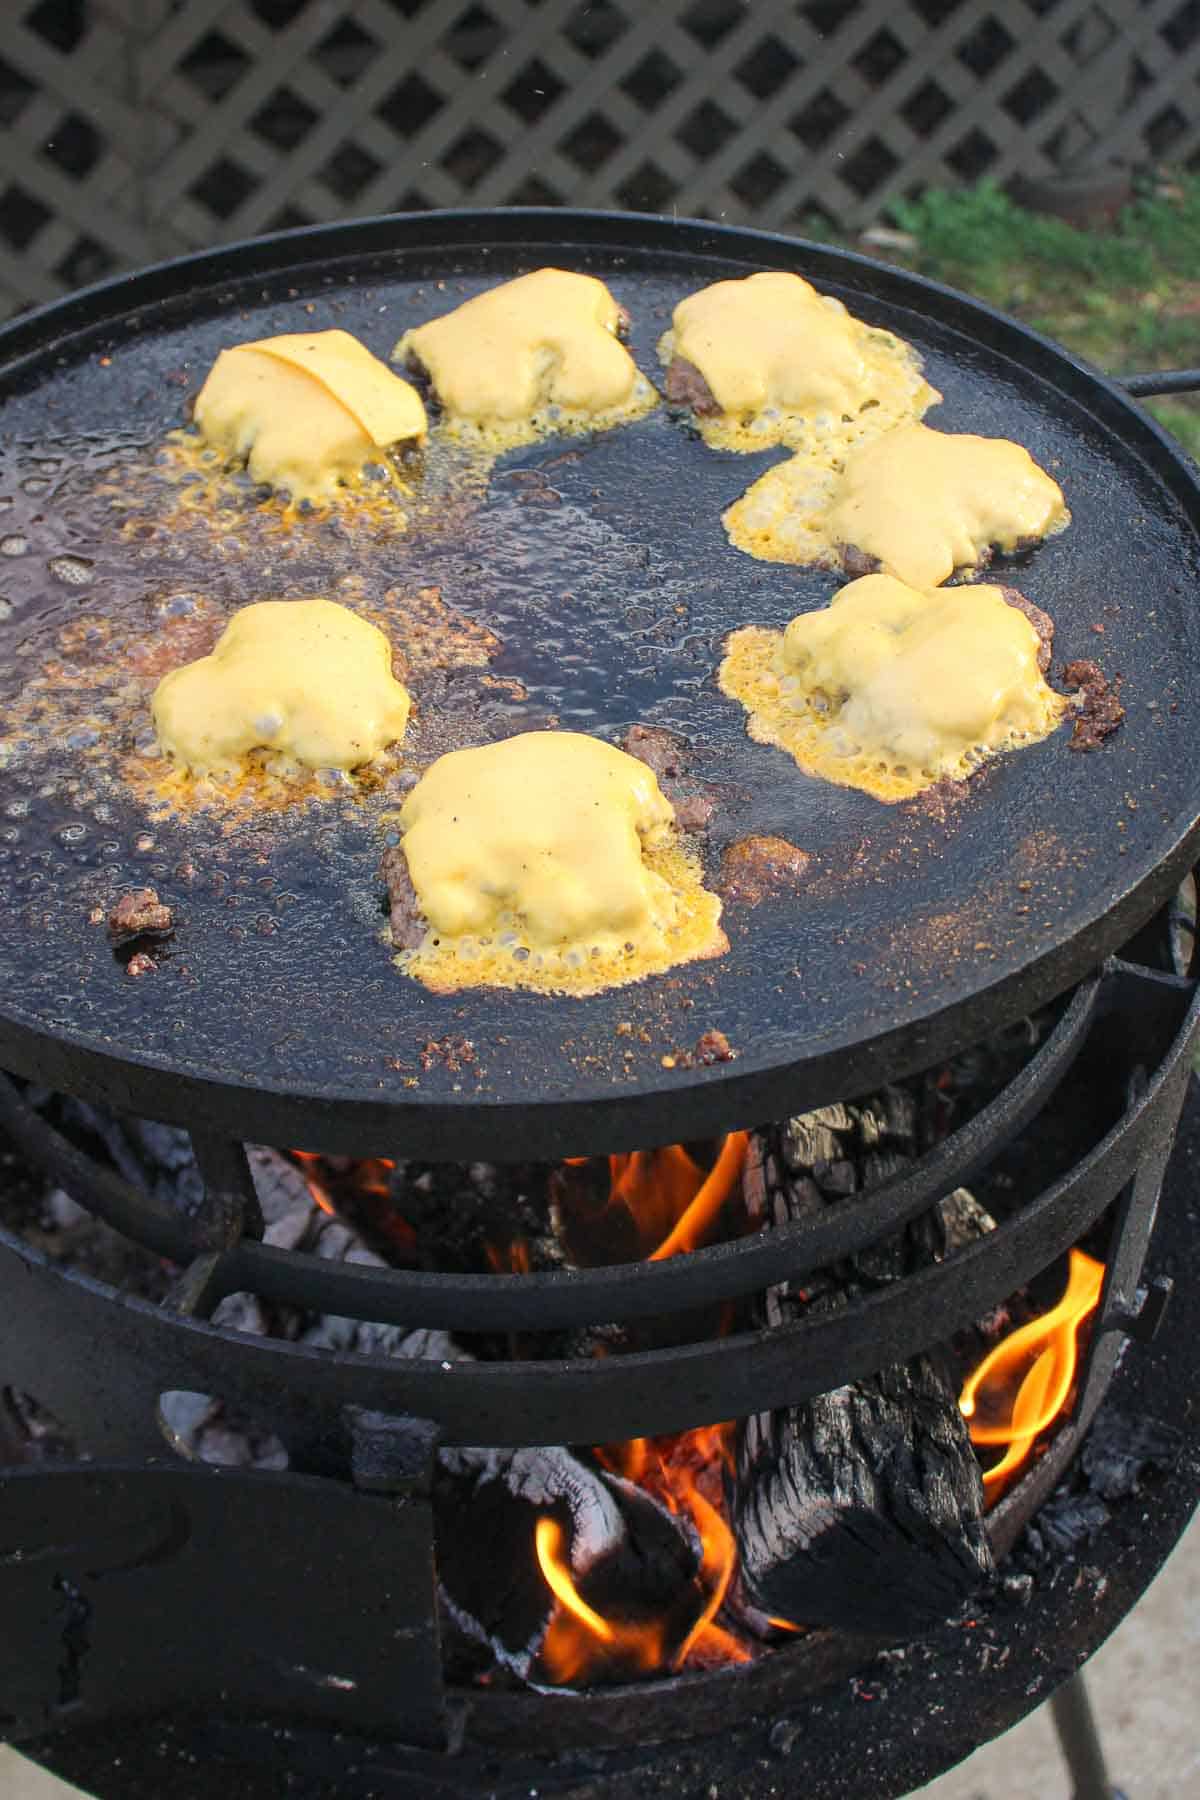 Melting cheese over the top of the  burger patties.